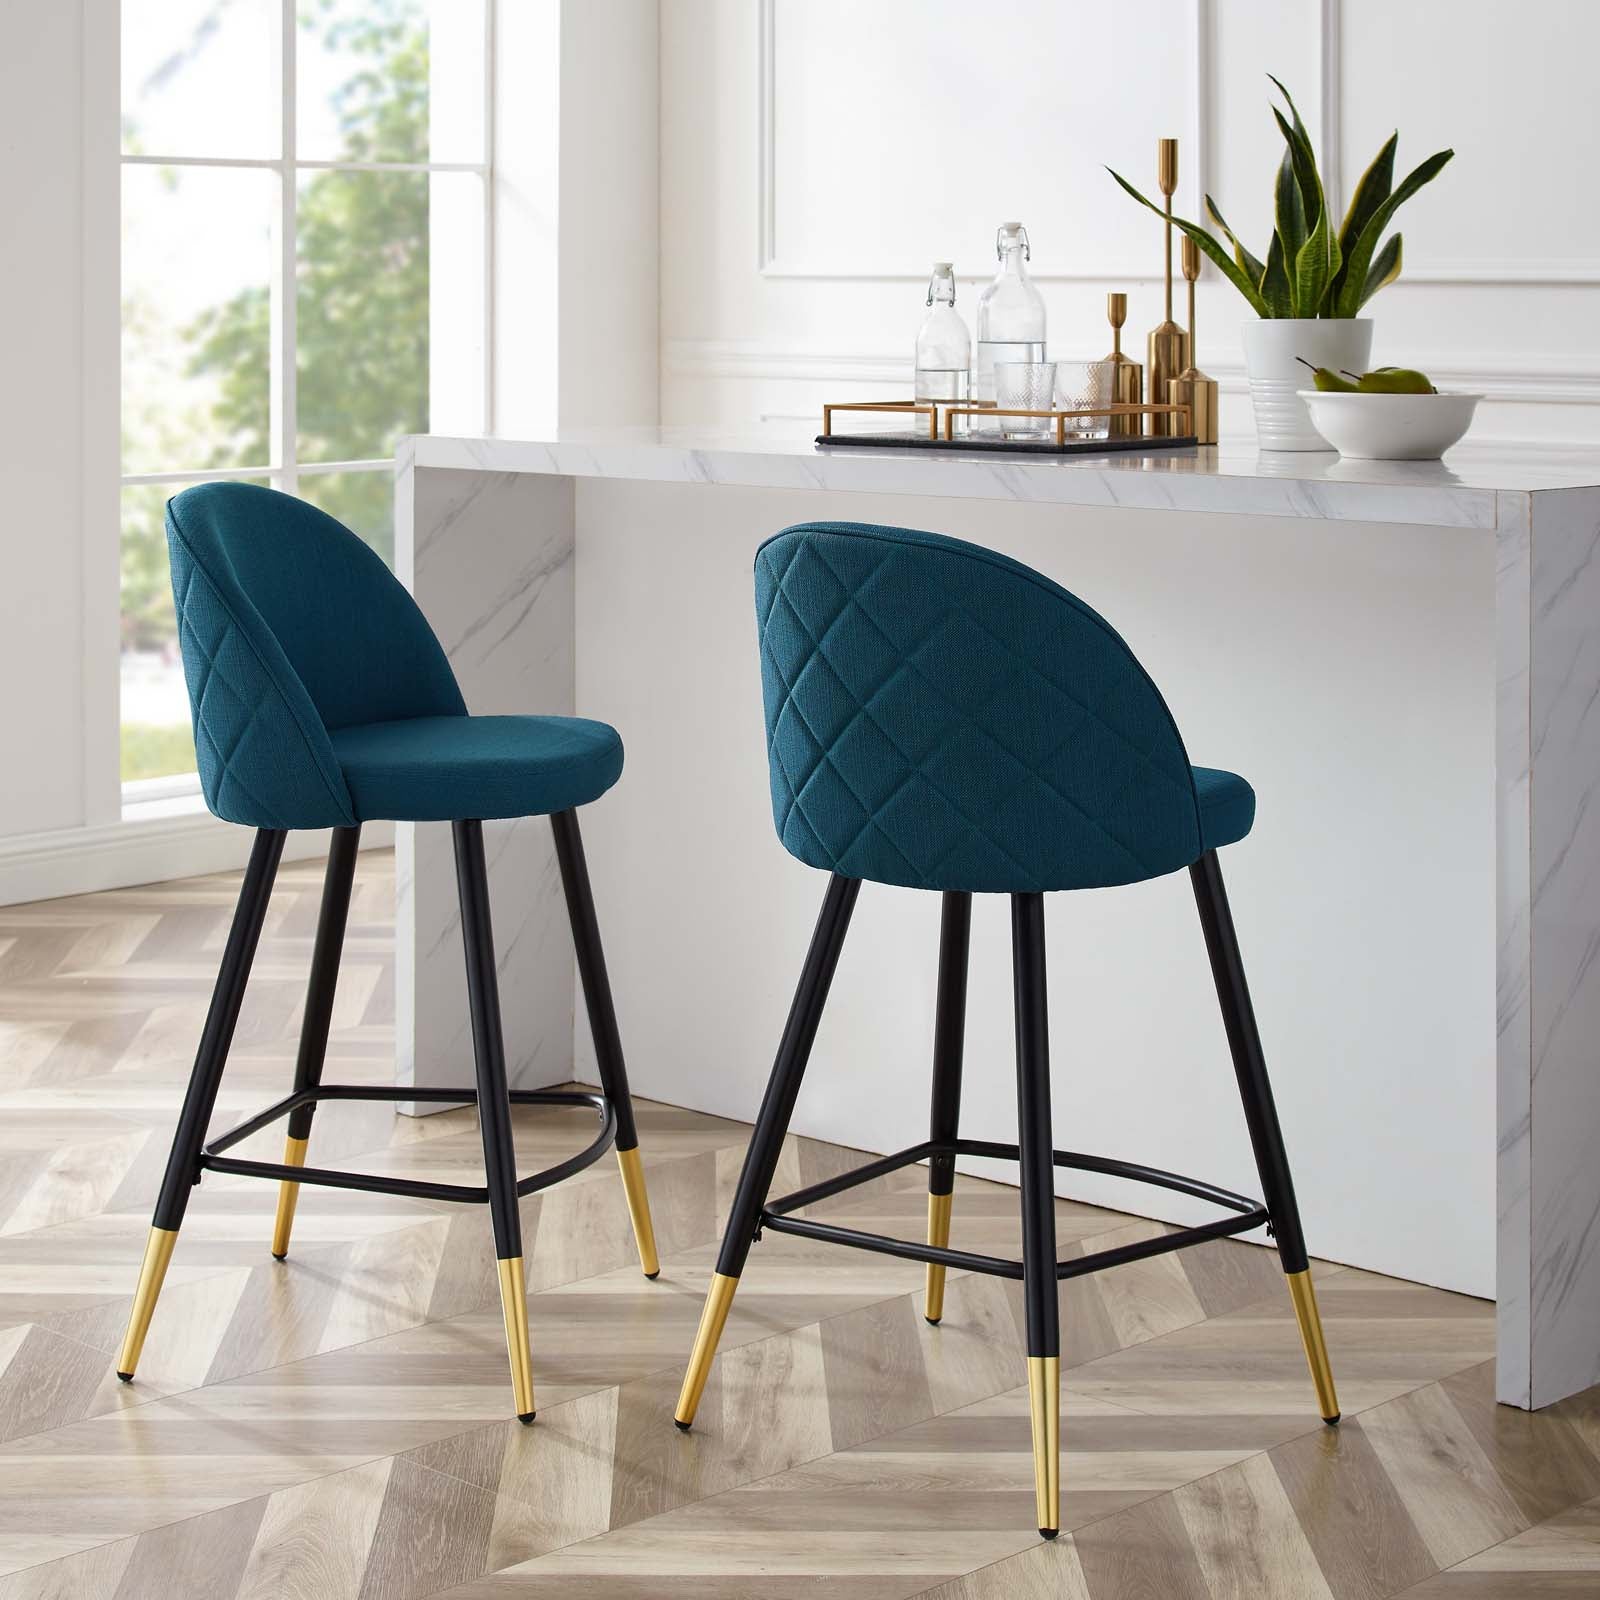 Cordial Fabric Counter Stools - Set of 2 - East Shore Modern Home Furnishings